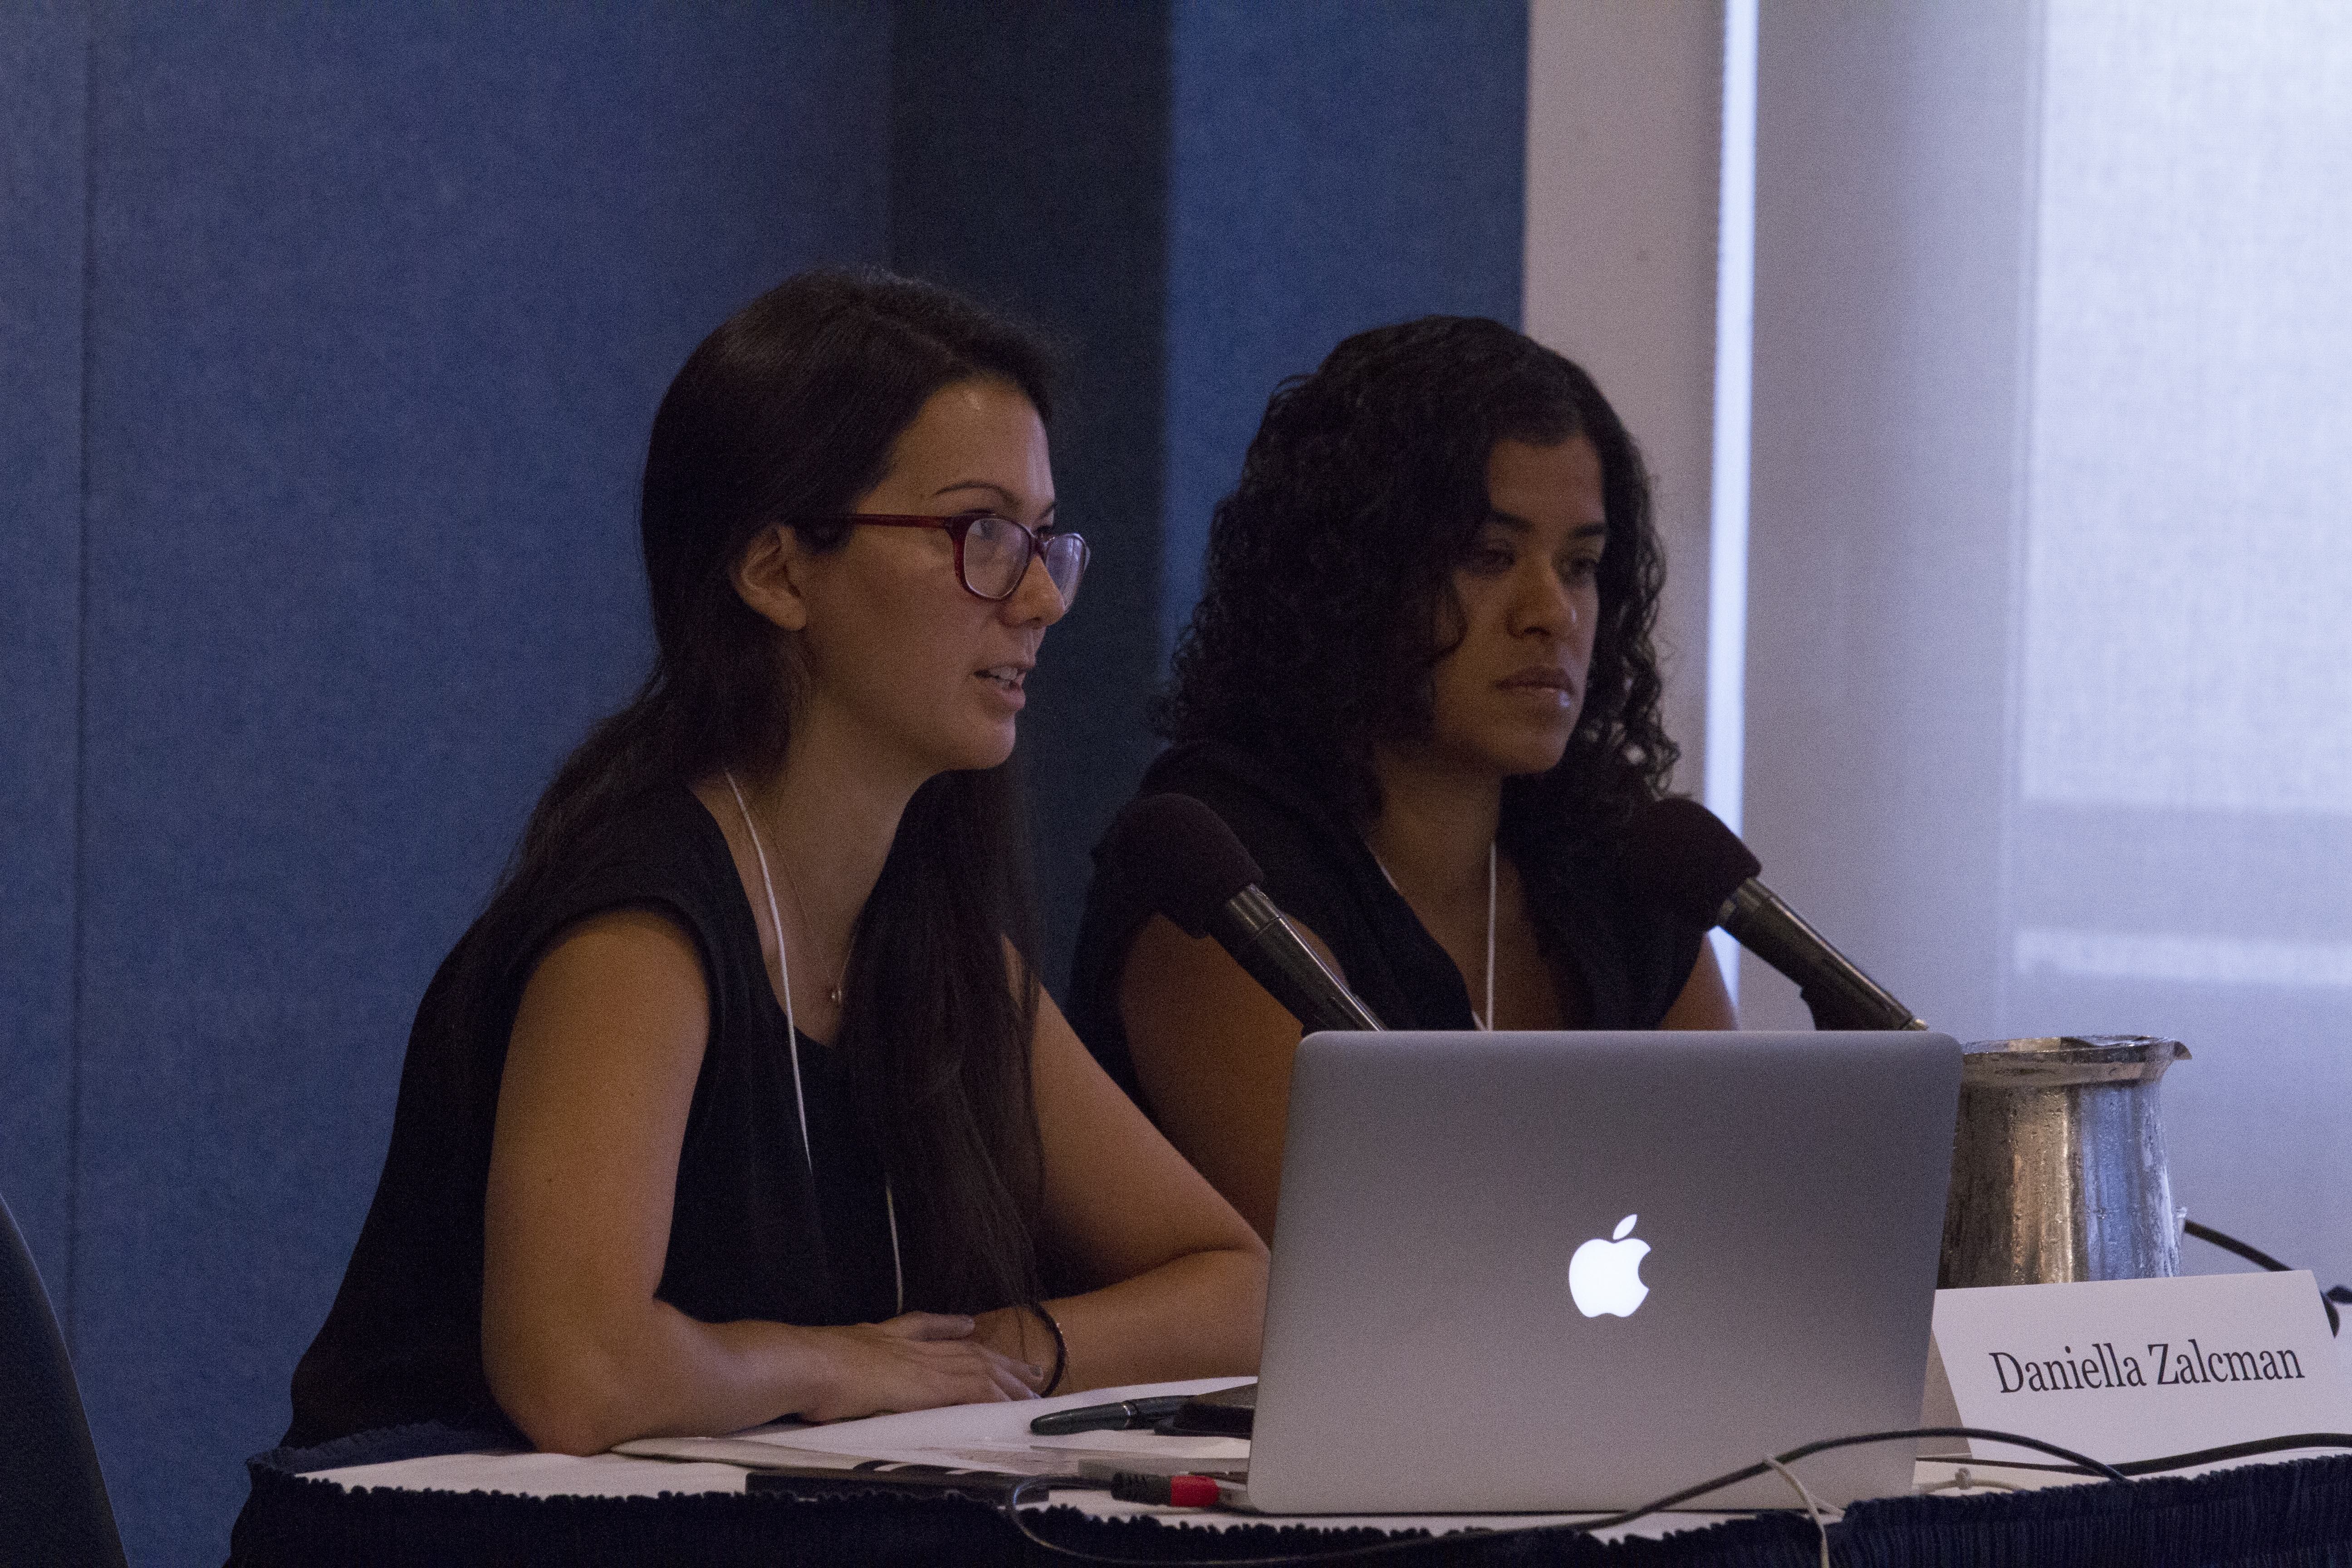 (Left to right) Daniella Zalcman and Jennifer Samuel address challenges and resources for women photographers and photographers of color at the Pulitzer Center Gender Lens Conference. Image by Jin Ding. United States, 2017.